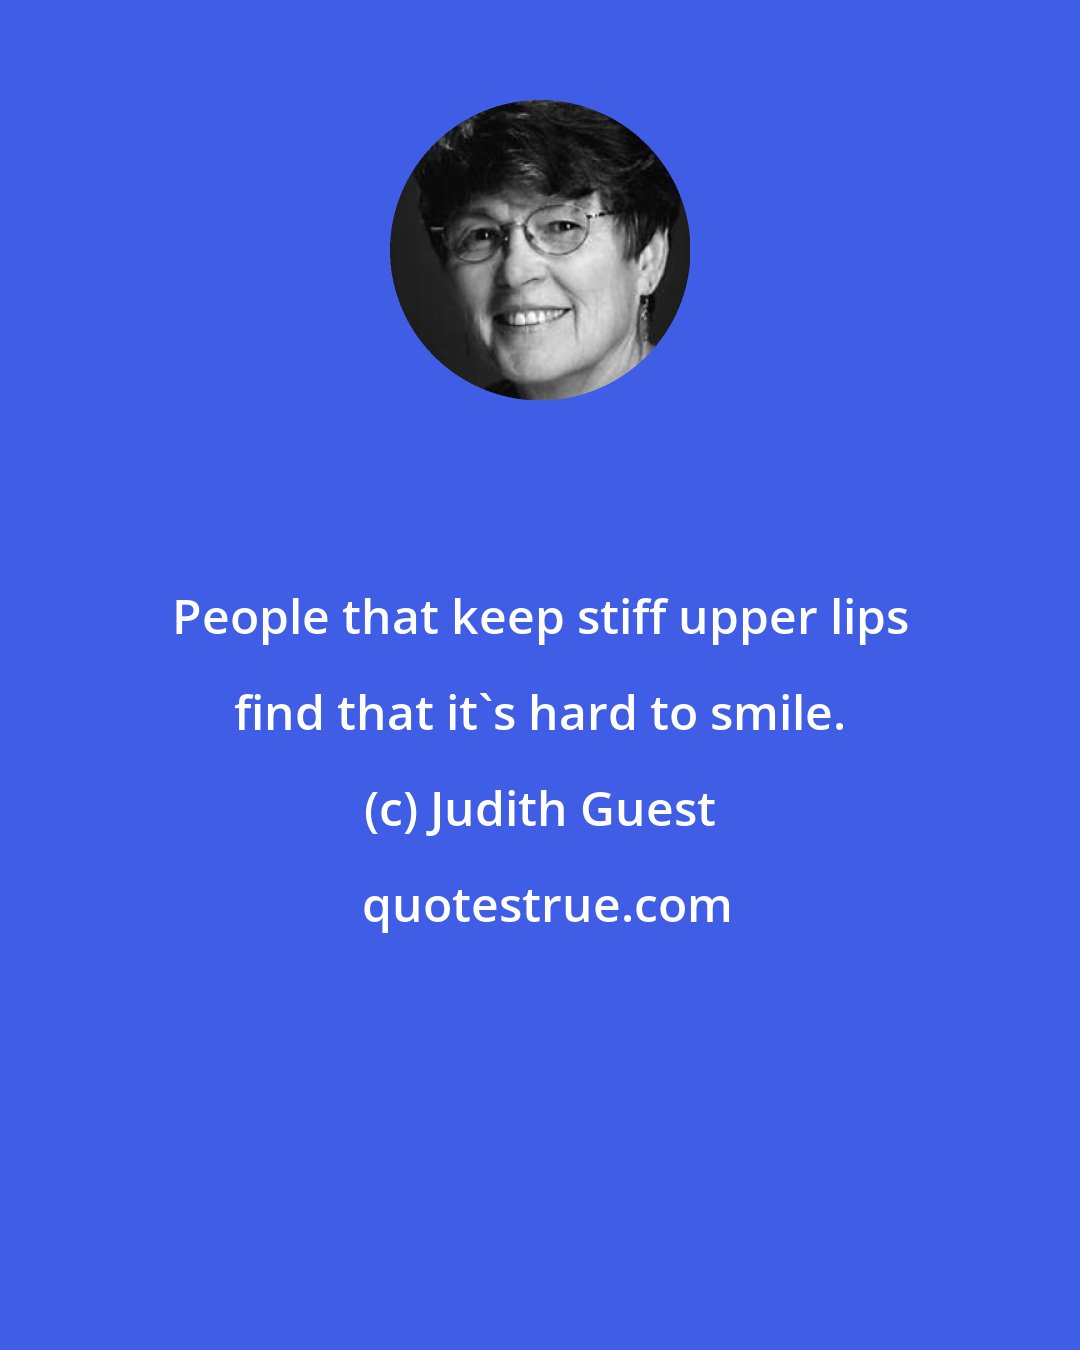 Judith Guest: People that keep stiff upper lips find that it's hard to smile.